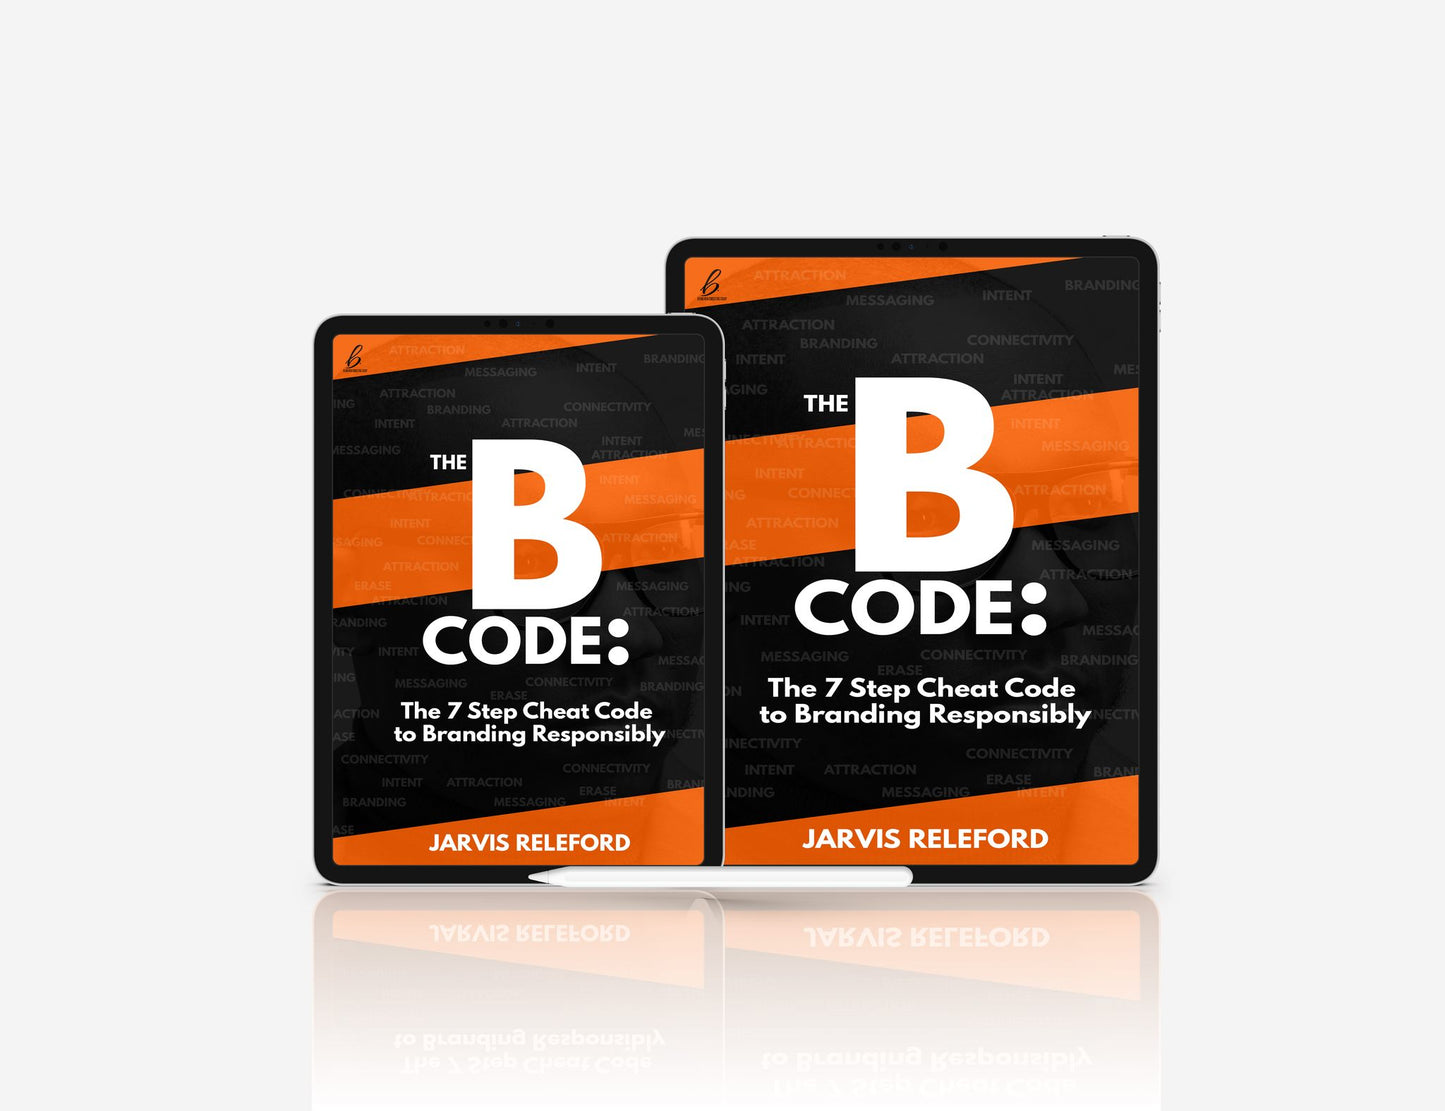 The B Code: 7 Steps to Branding Responsibly